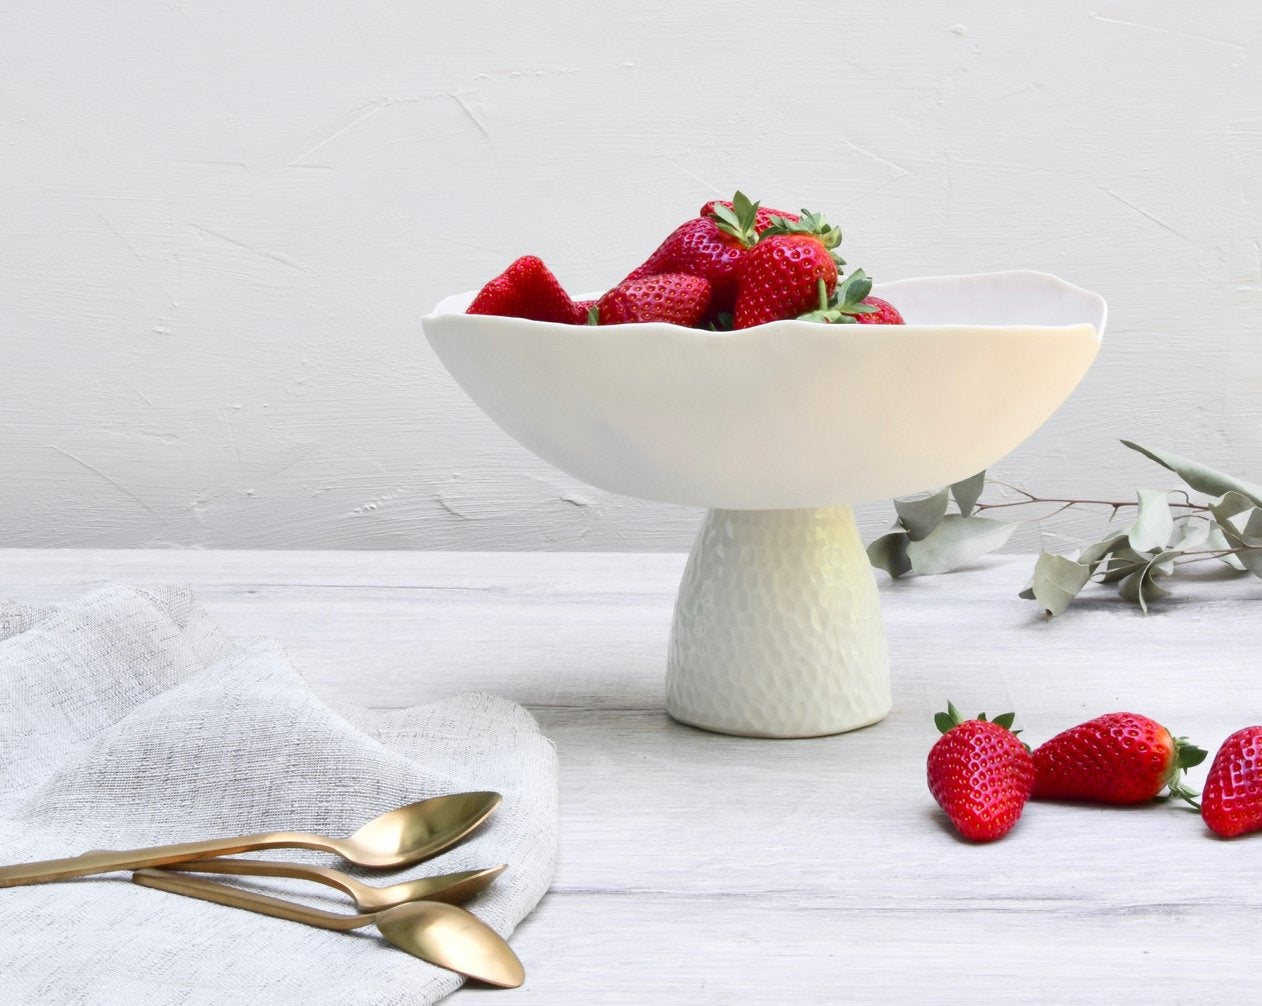 Fruit bowl stand, white porcelain | Ready to ship